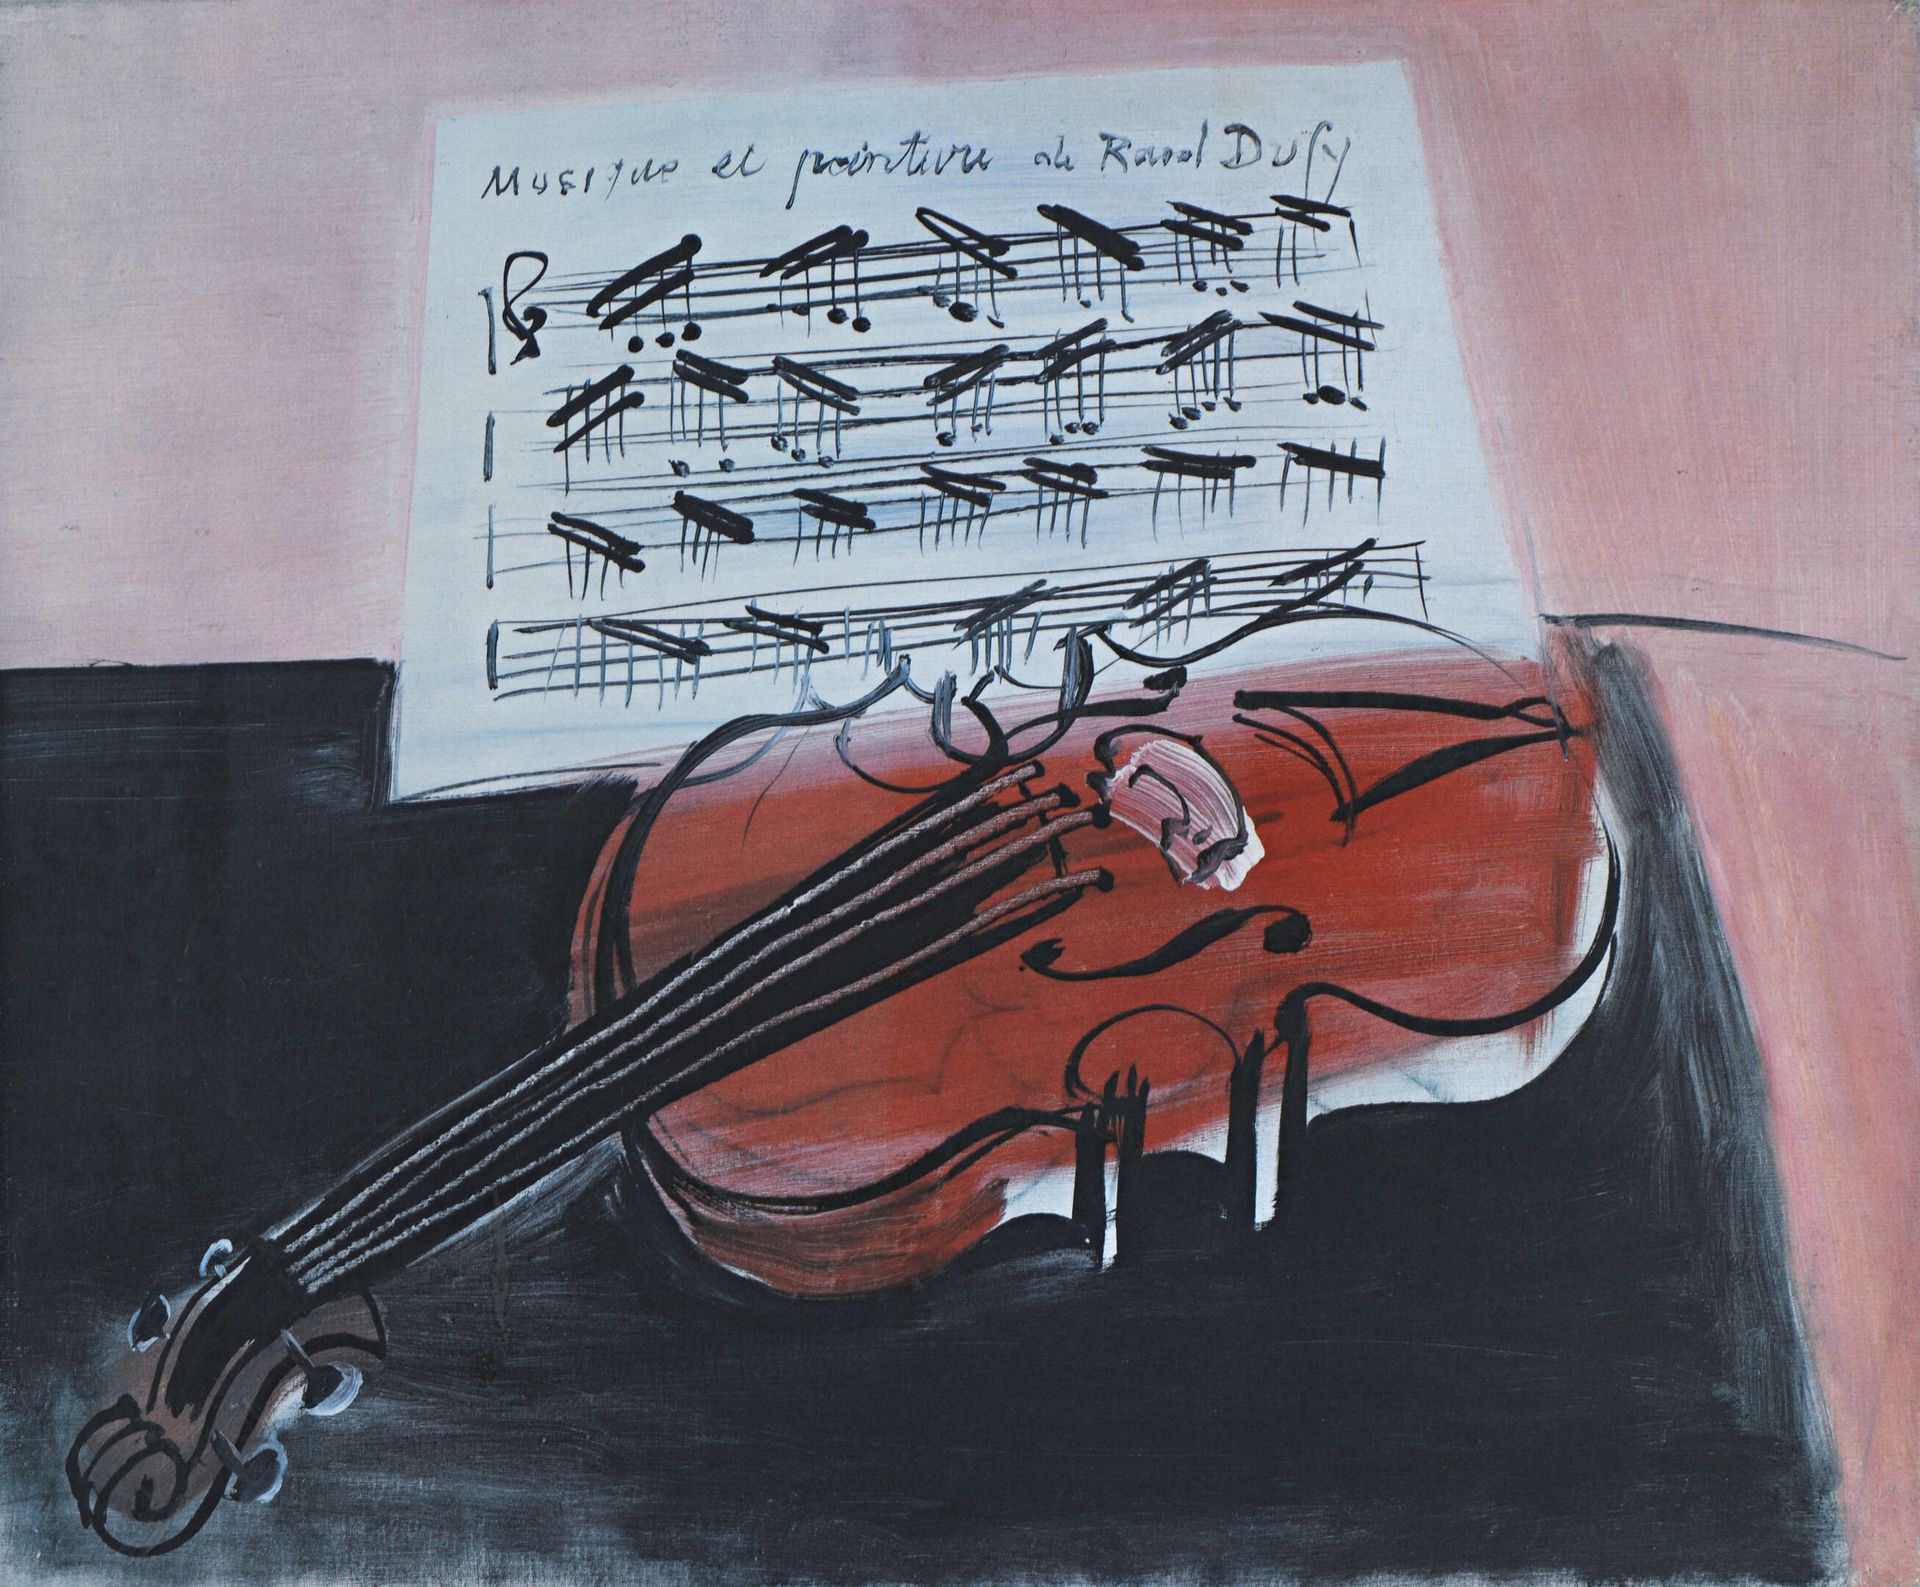 Null After RAOUL DUFY
"Music and painting".
Offset on paper.
49 x 69 cm.